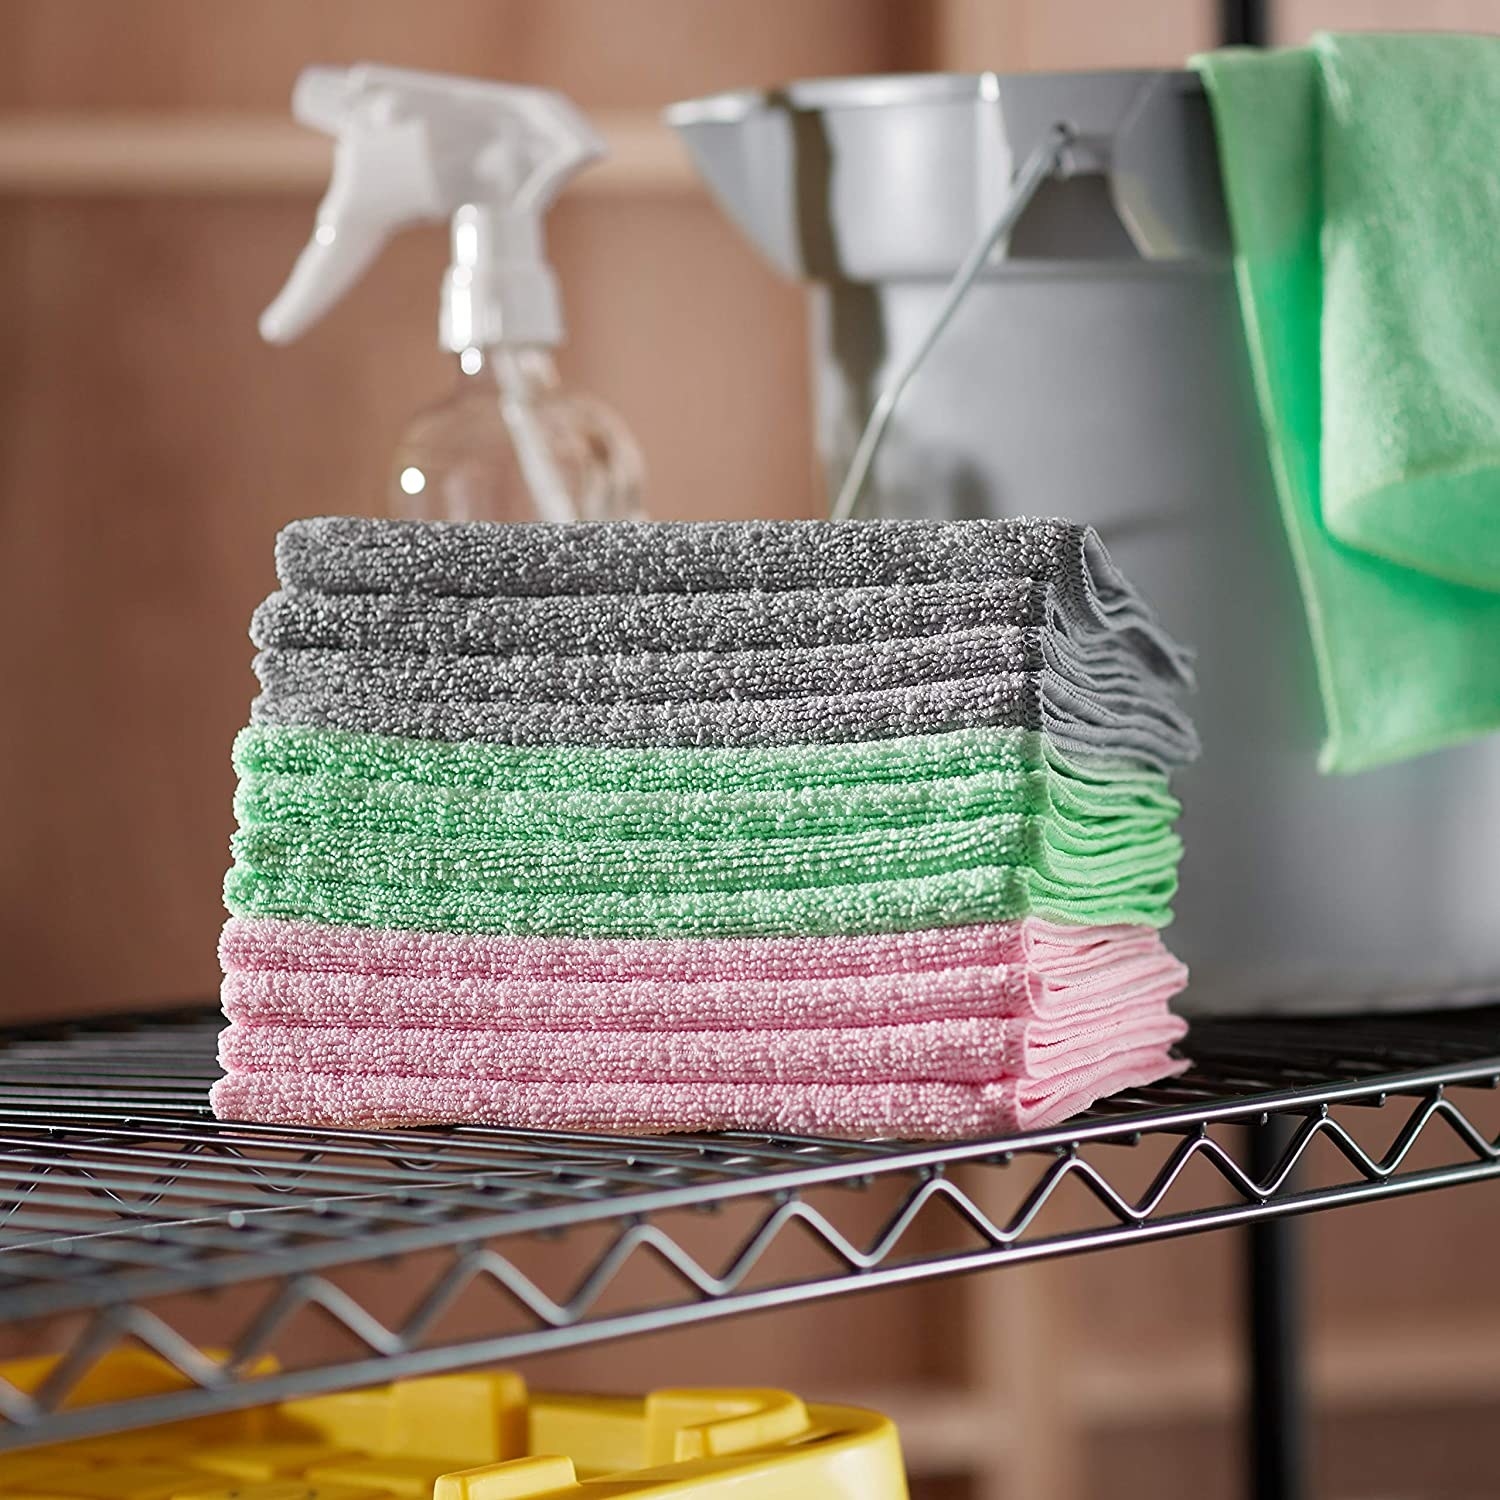 a stack of gray, green, and pink microfiber cloths